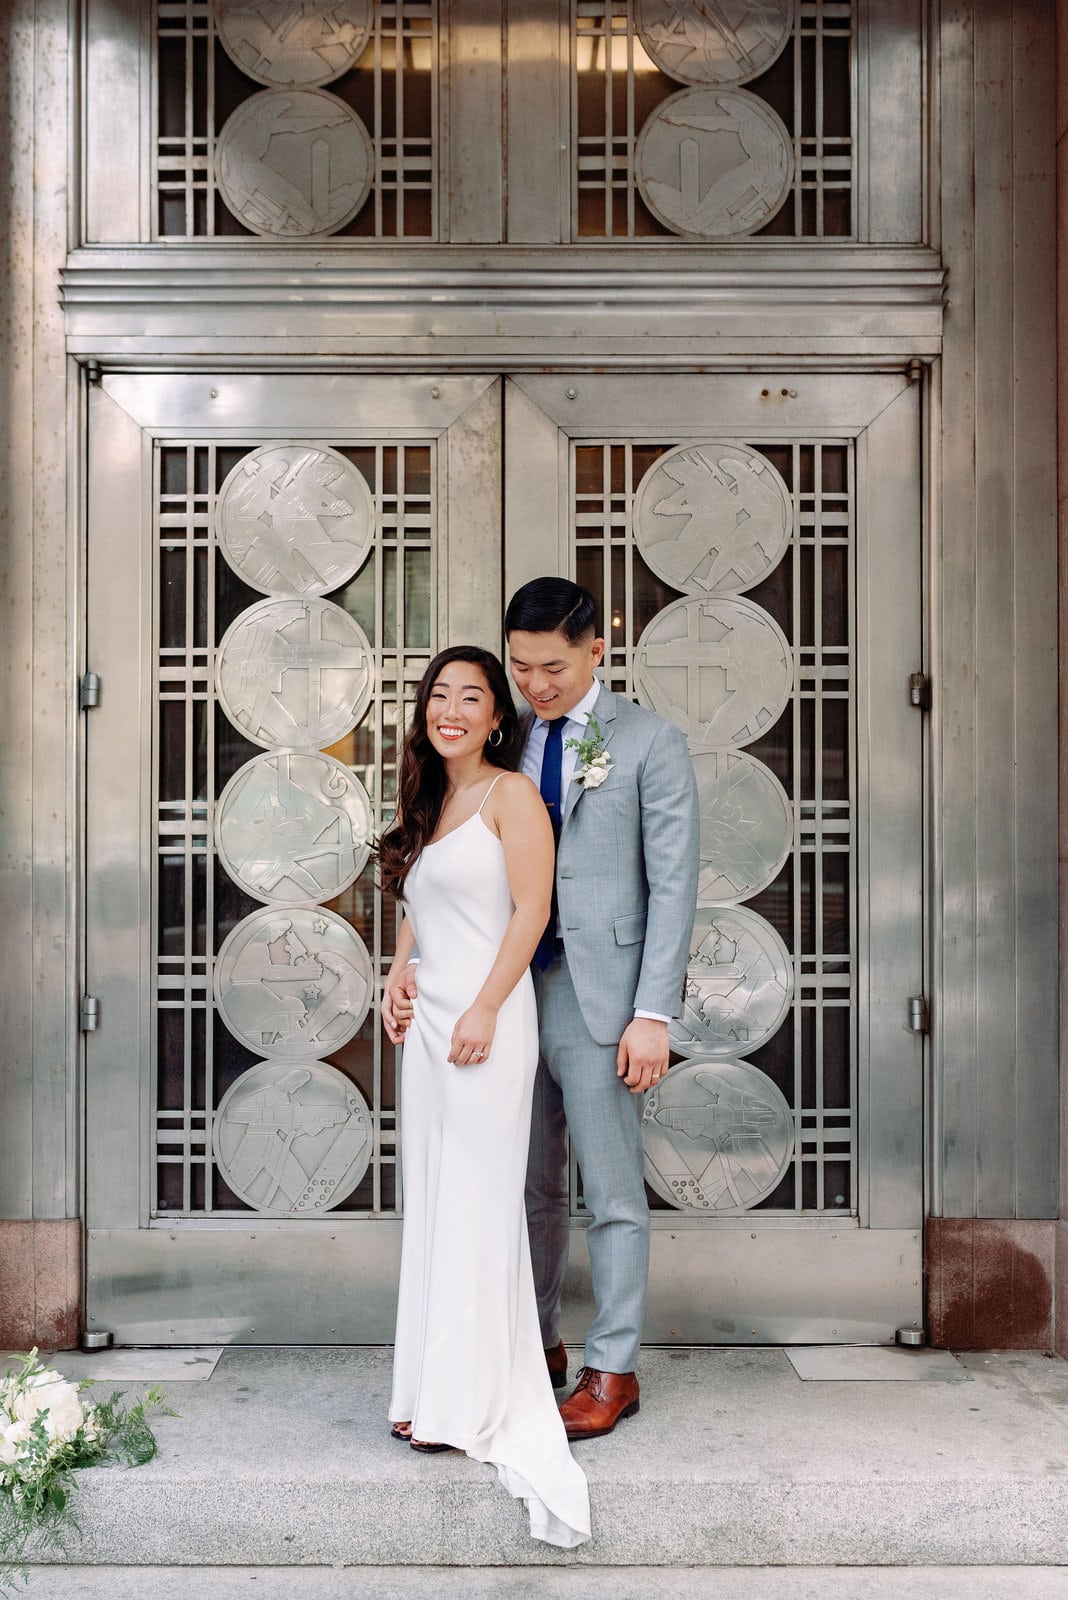 Bride and Groom Editorial Portraits Around Financial District Downtown Toronto Wedding Photographer Jacqueline James Photography